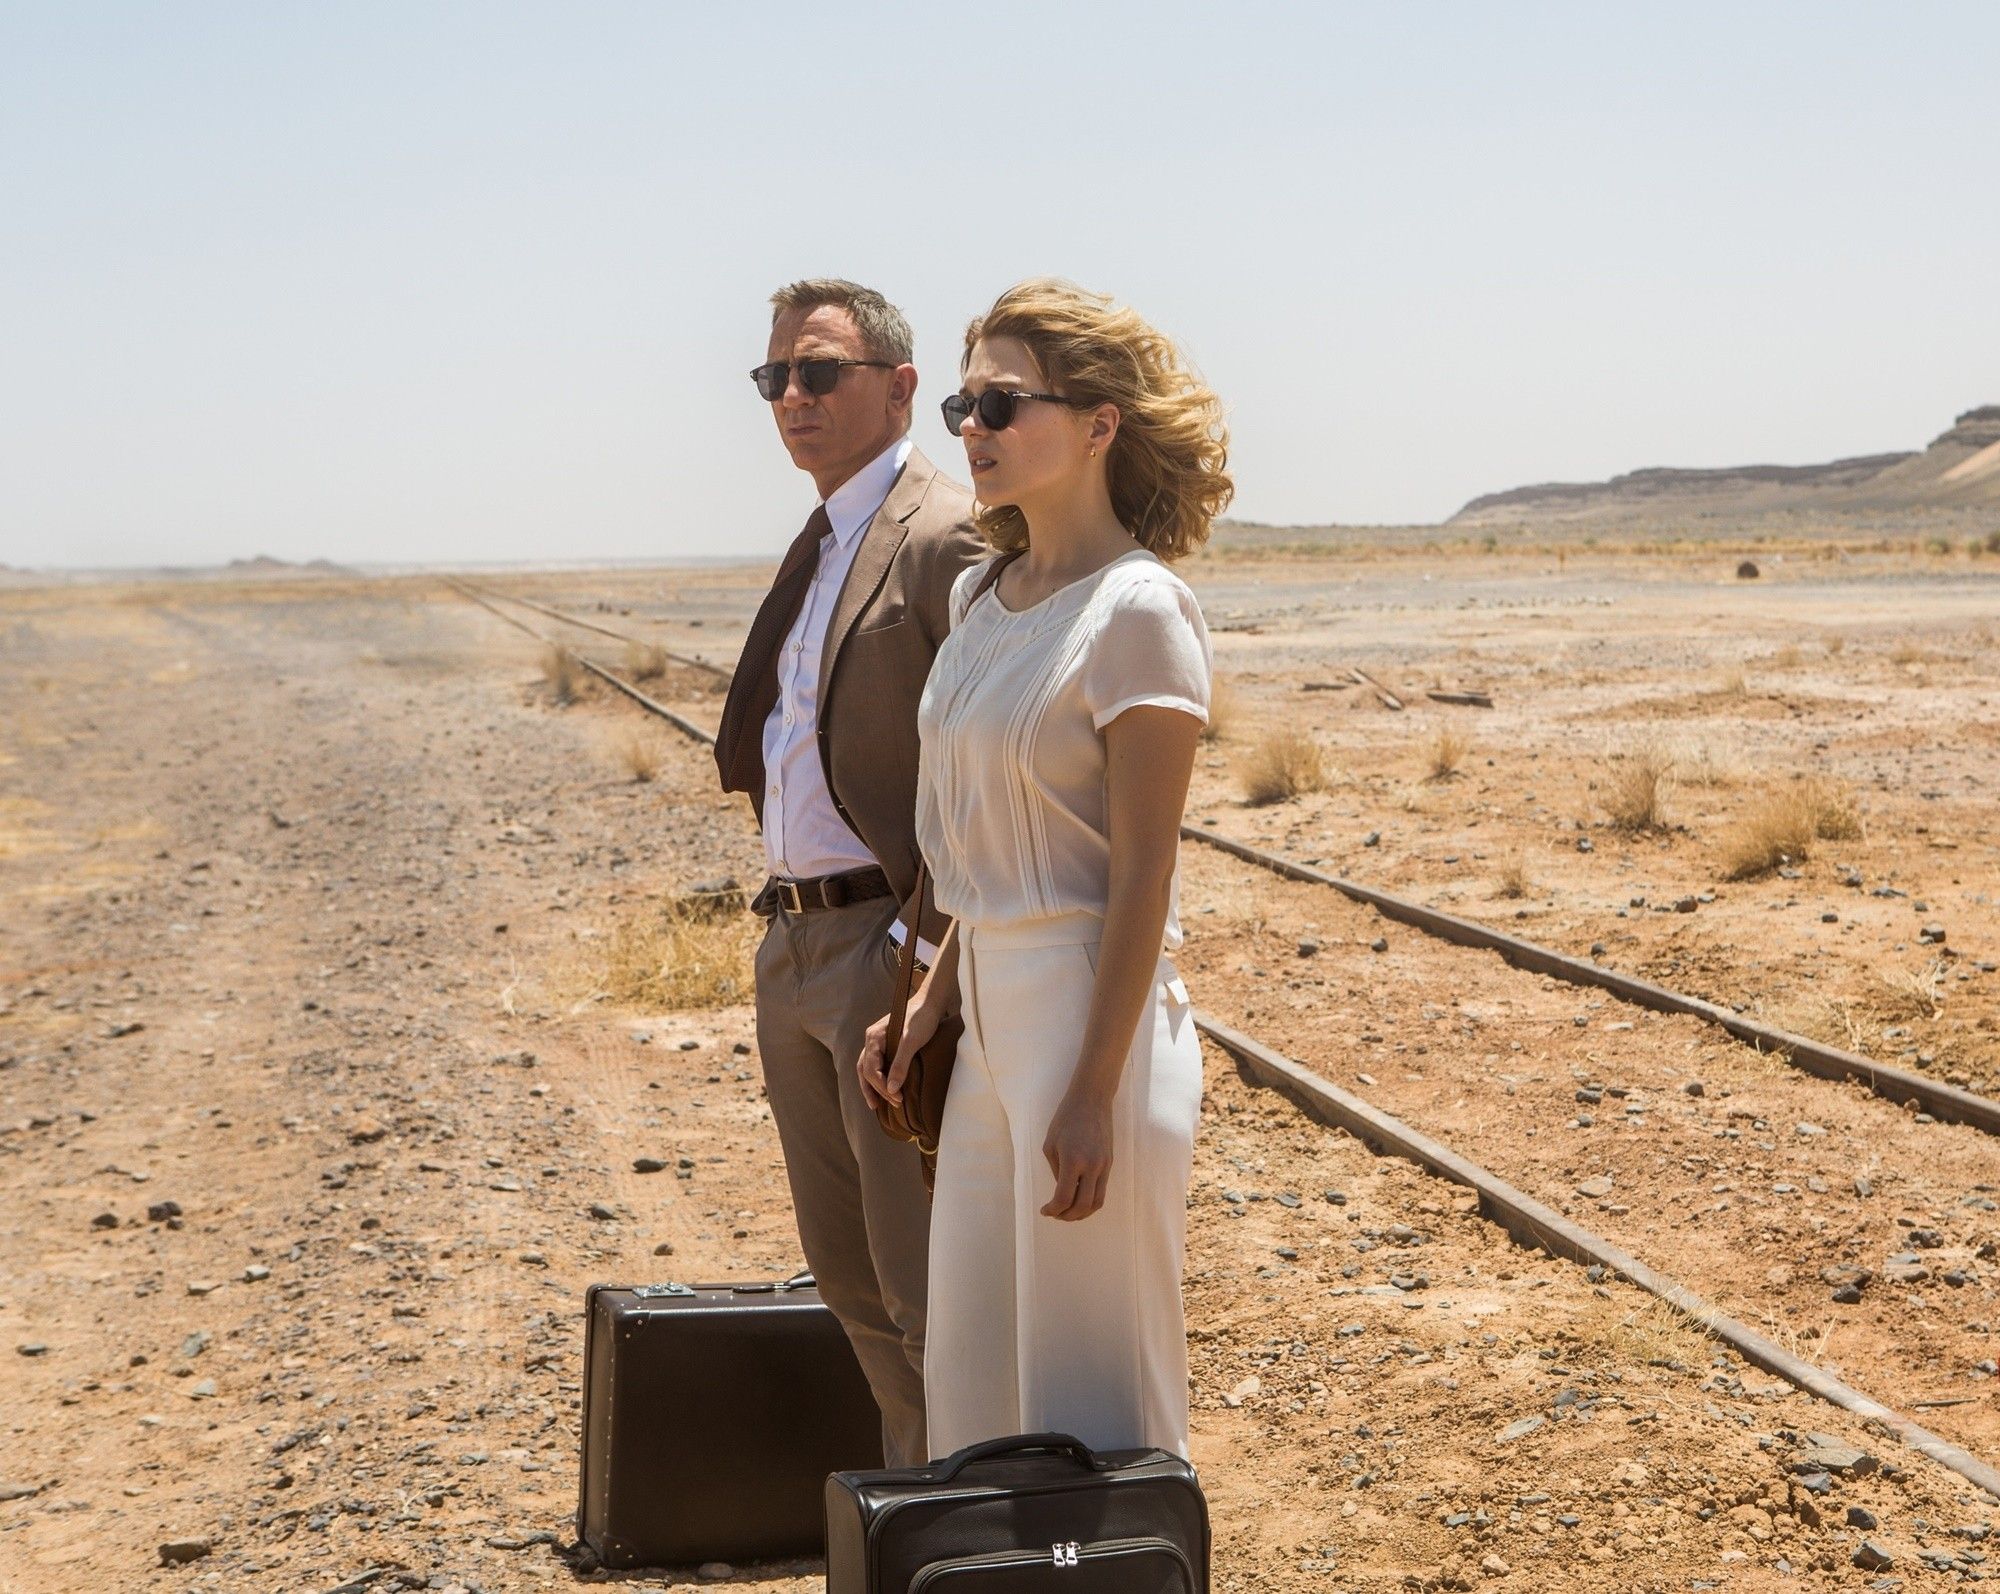 Daniel Craig stars as James Bond and Lea Seydoux stars as Madeleine Swann in Sony Pictures' Spectre (2015)